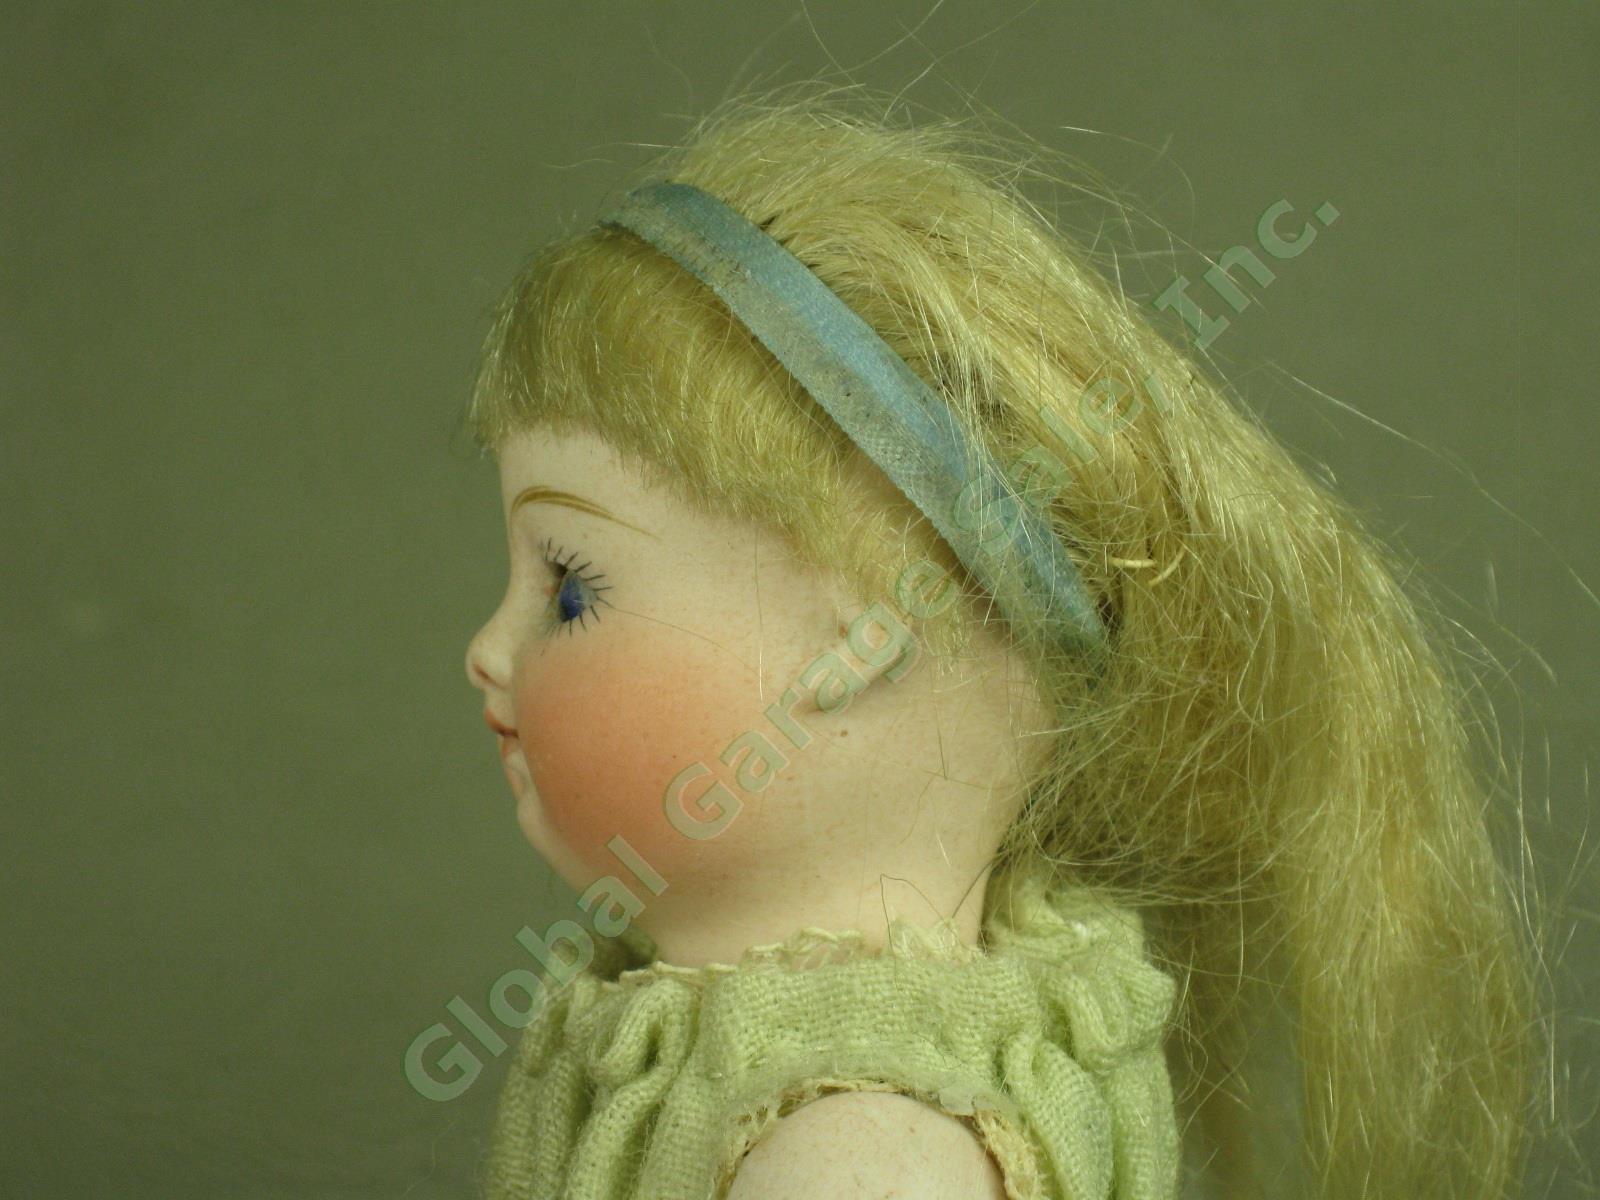 Vtg Antique 1880s-1890s French Bisque Girl Child Doll W/ Sleep Eyes Wood Cradle 3